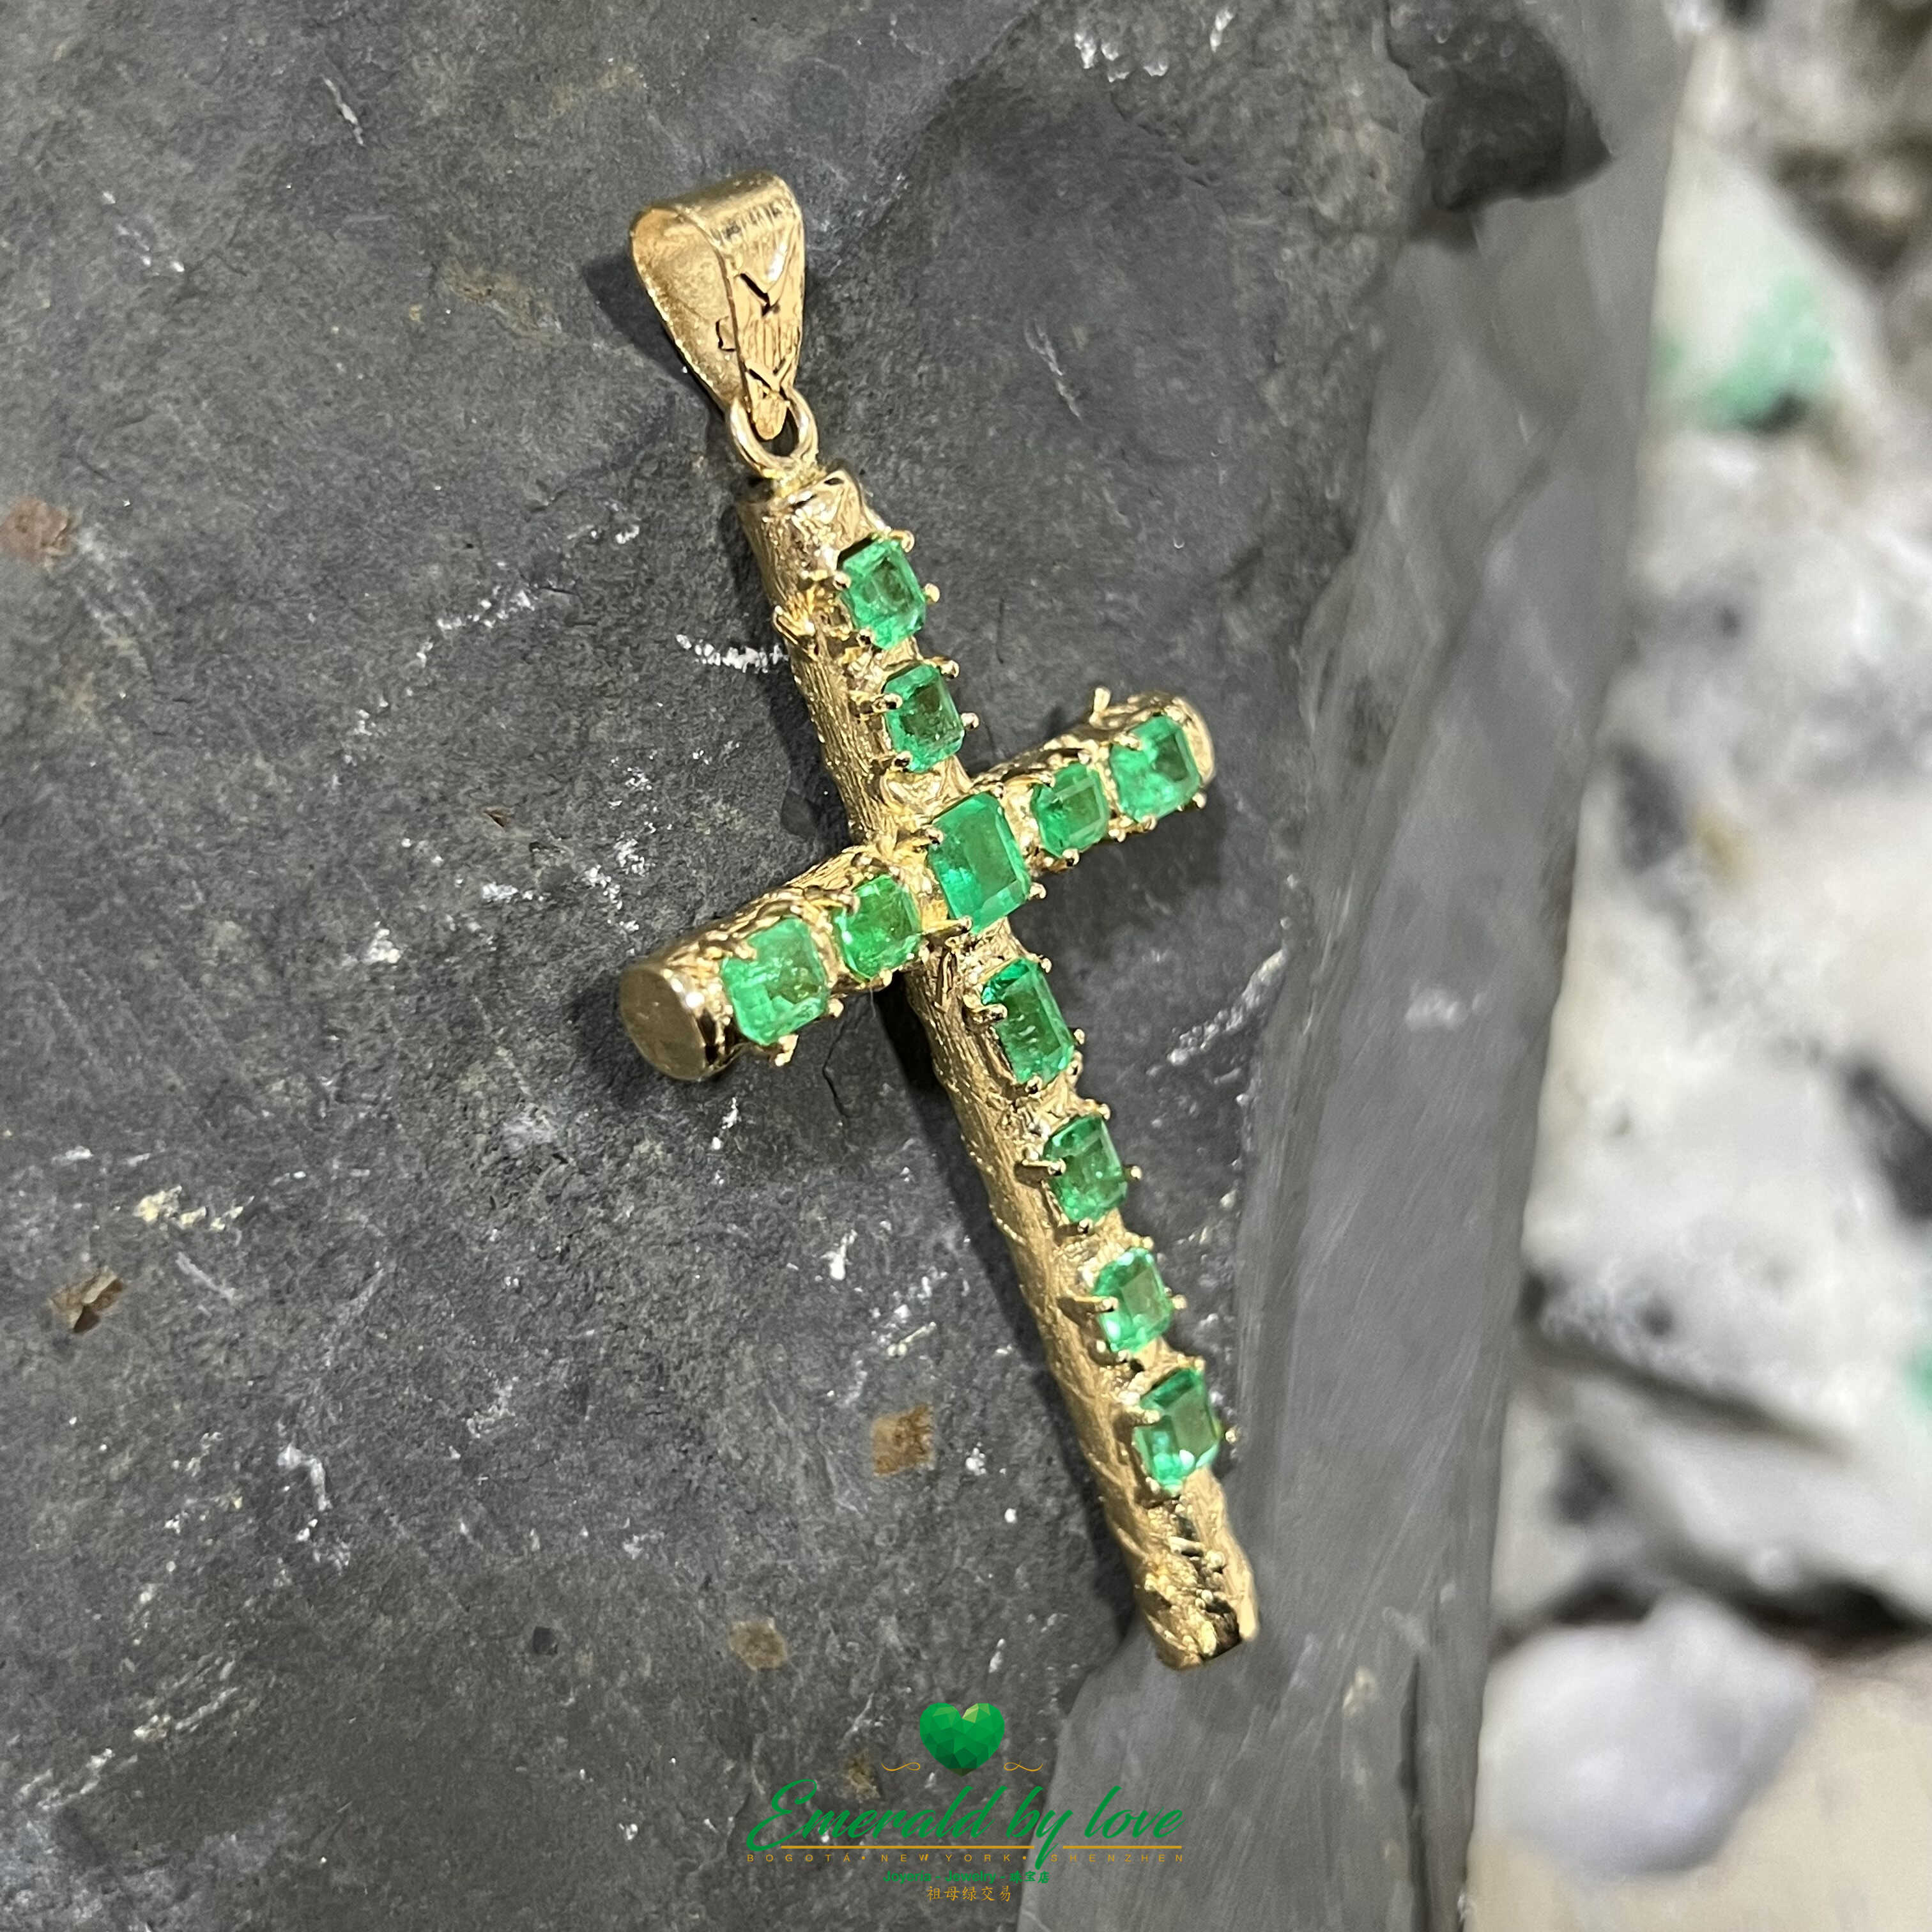 Intriguing 18k Yellow Gold Cross Pendant with Genuine Colombian Square Emeralds